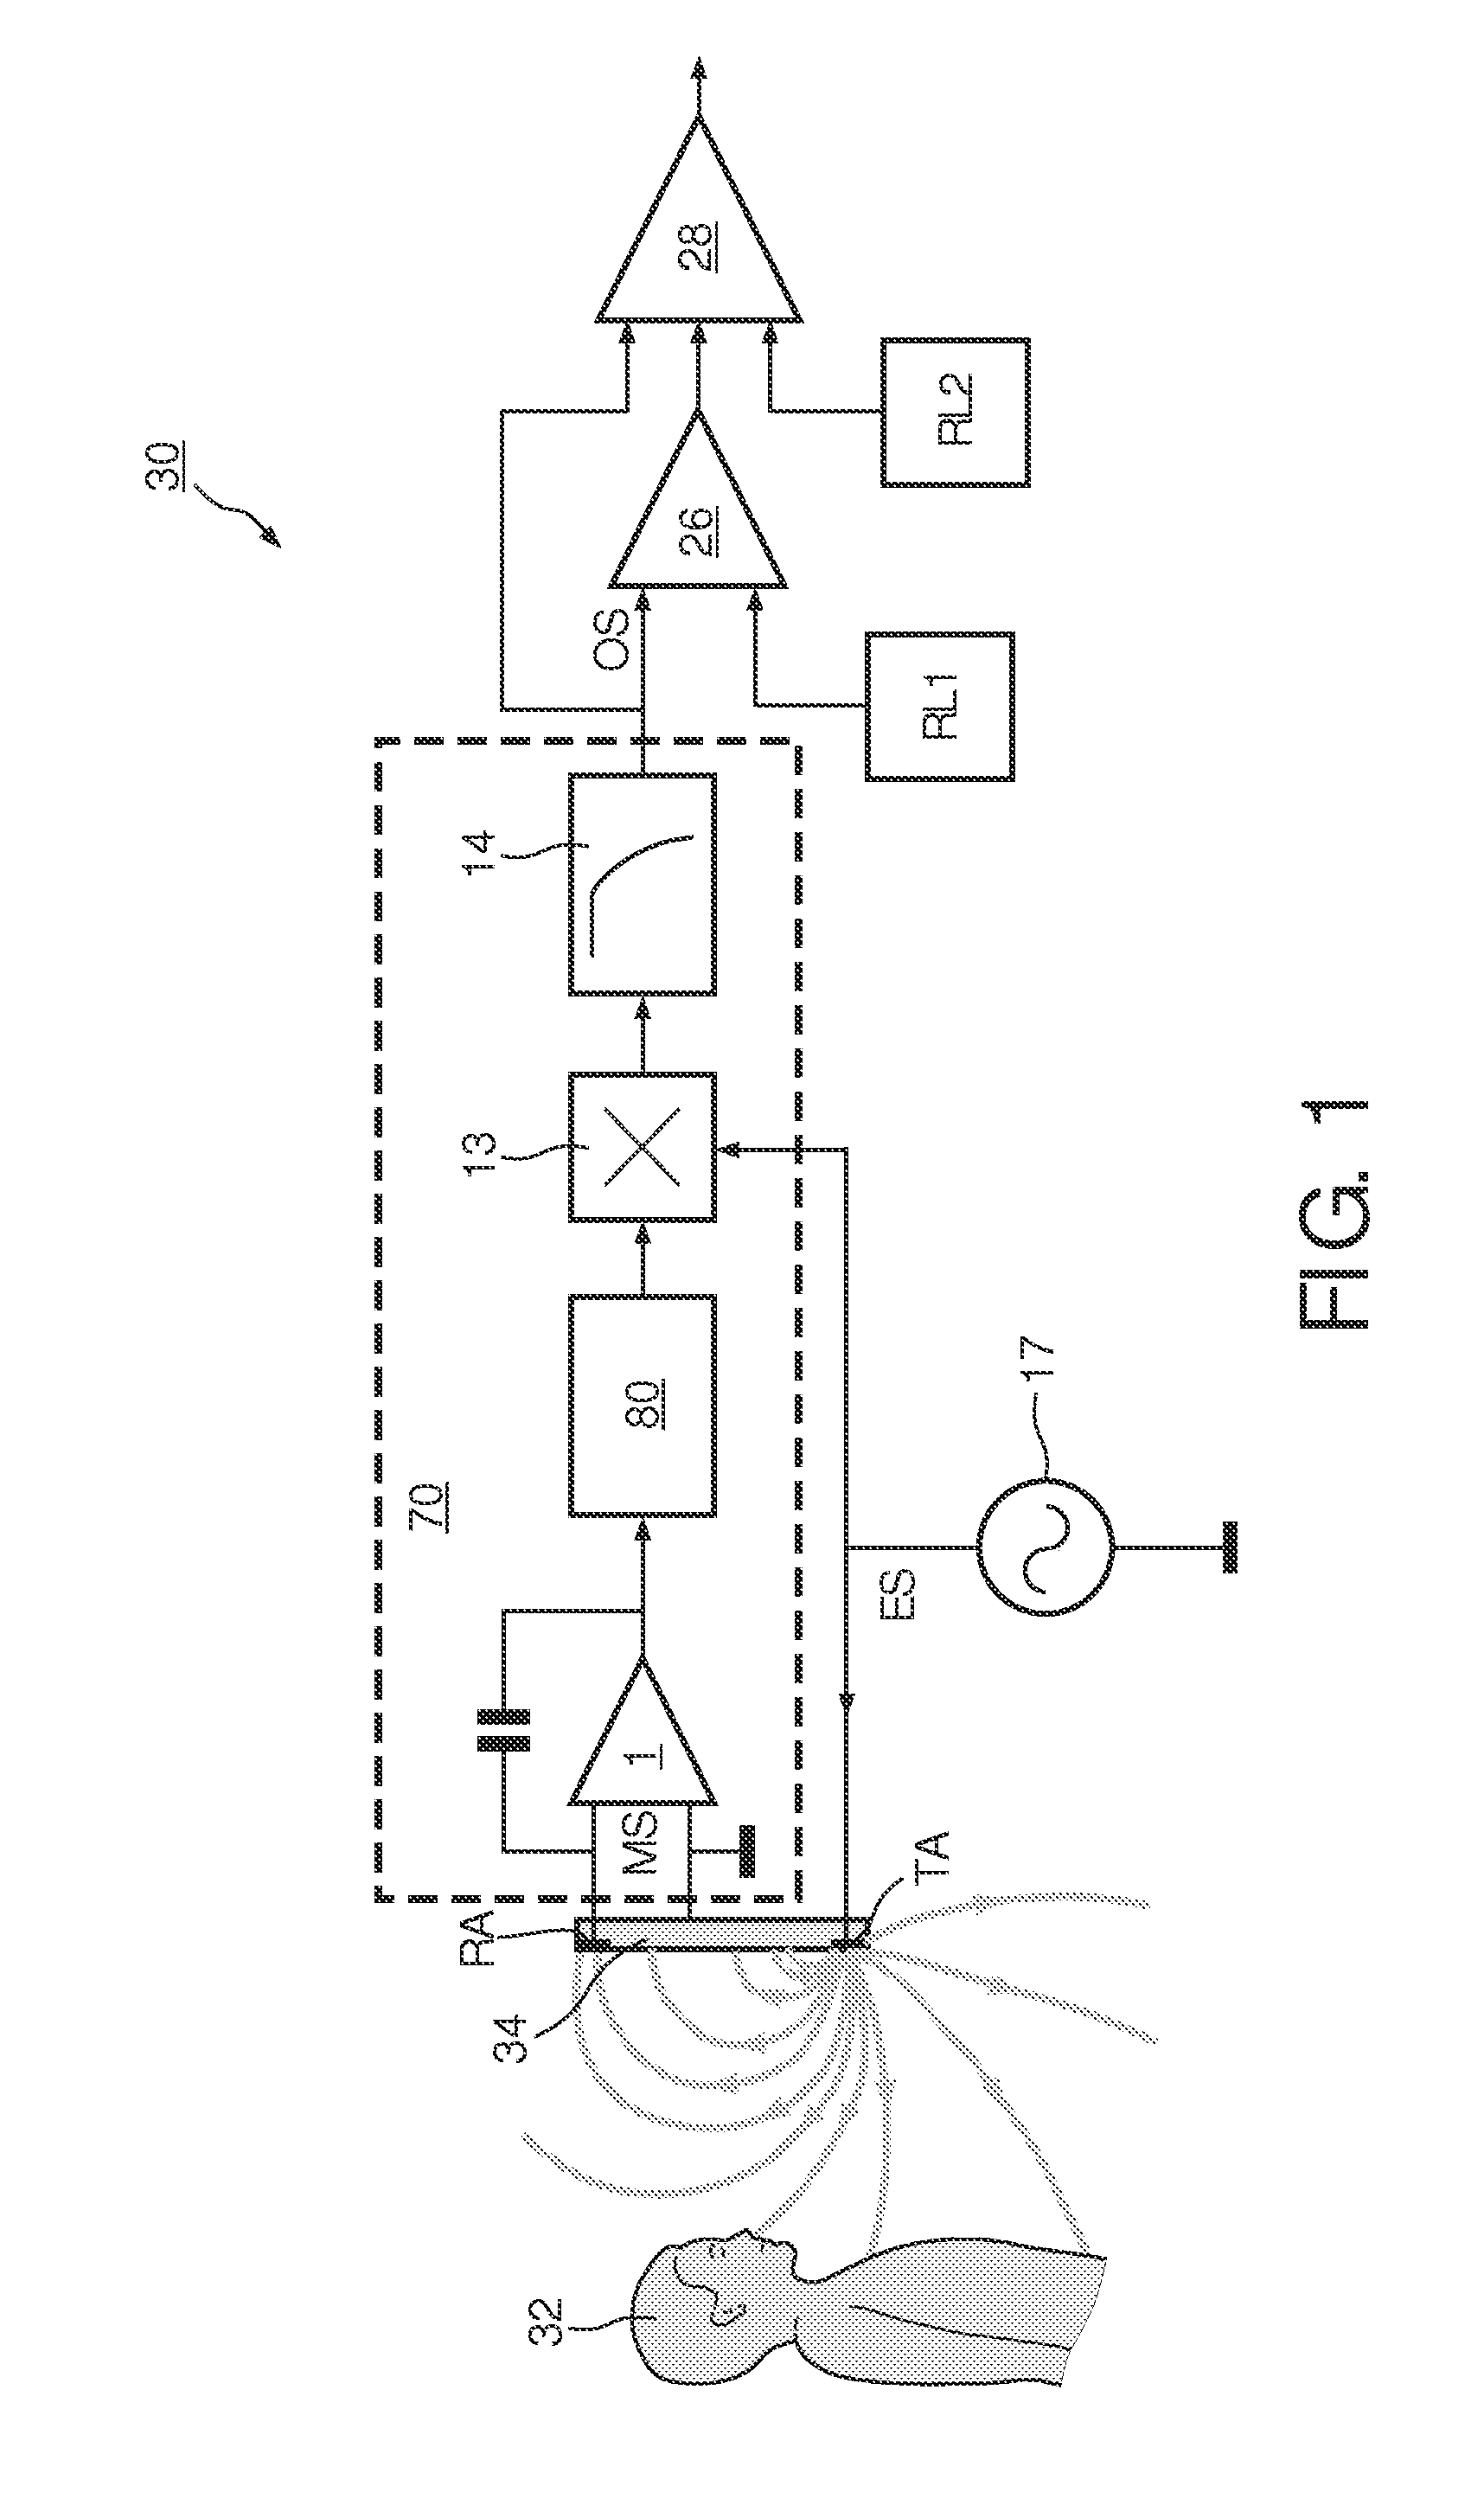 Capacitive proximity device and electronic device comprising the capacitive proximity device